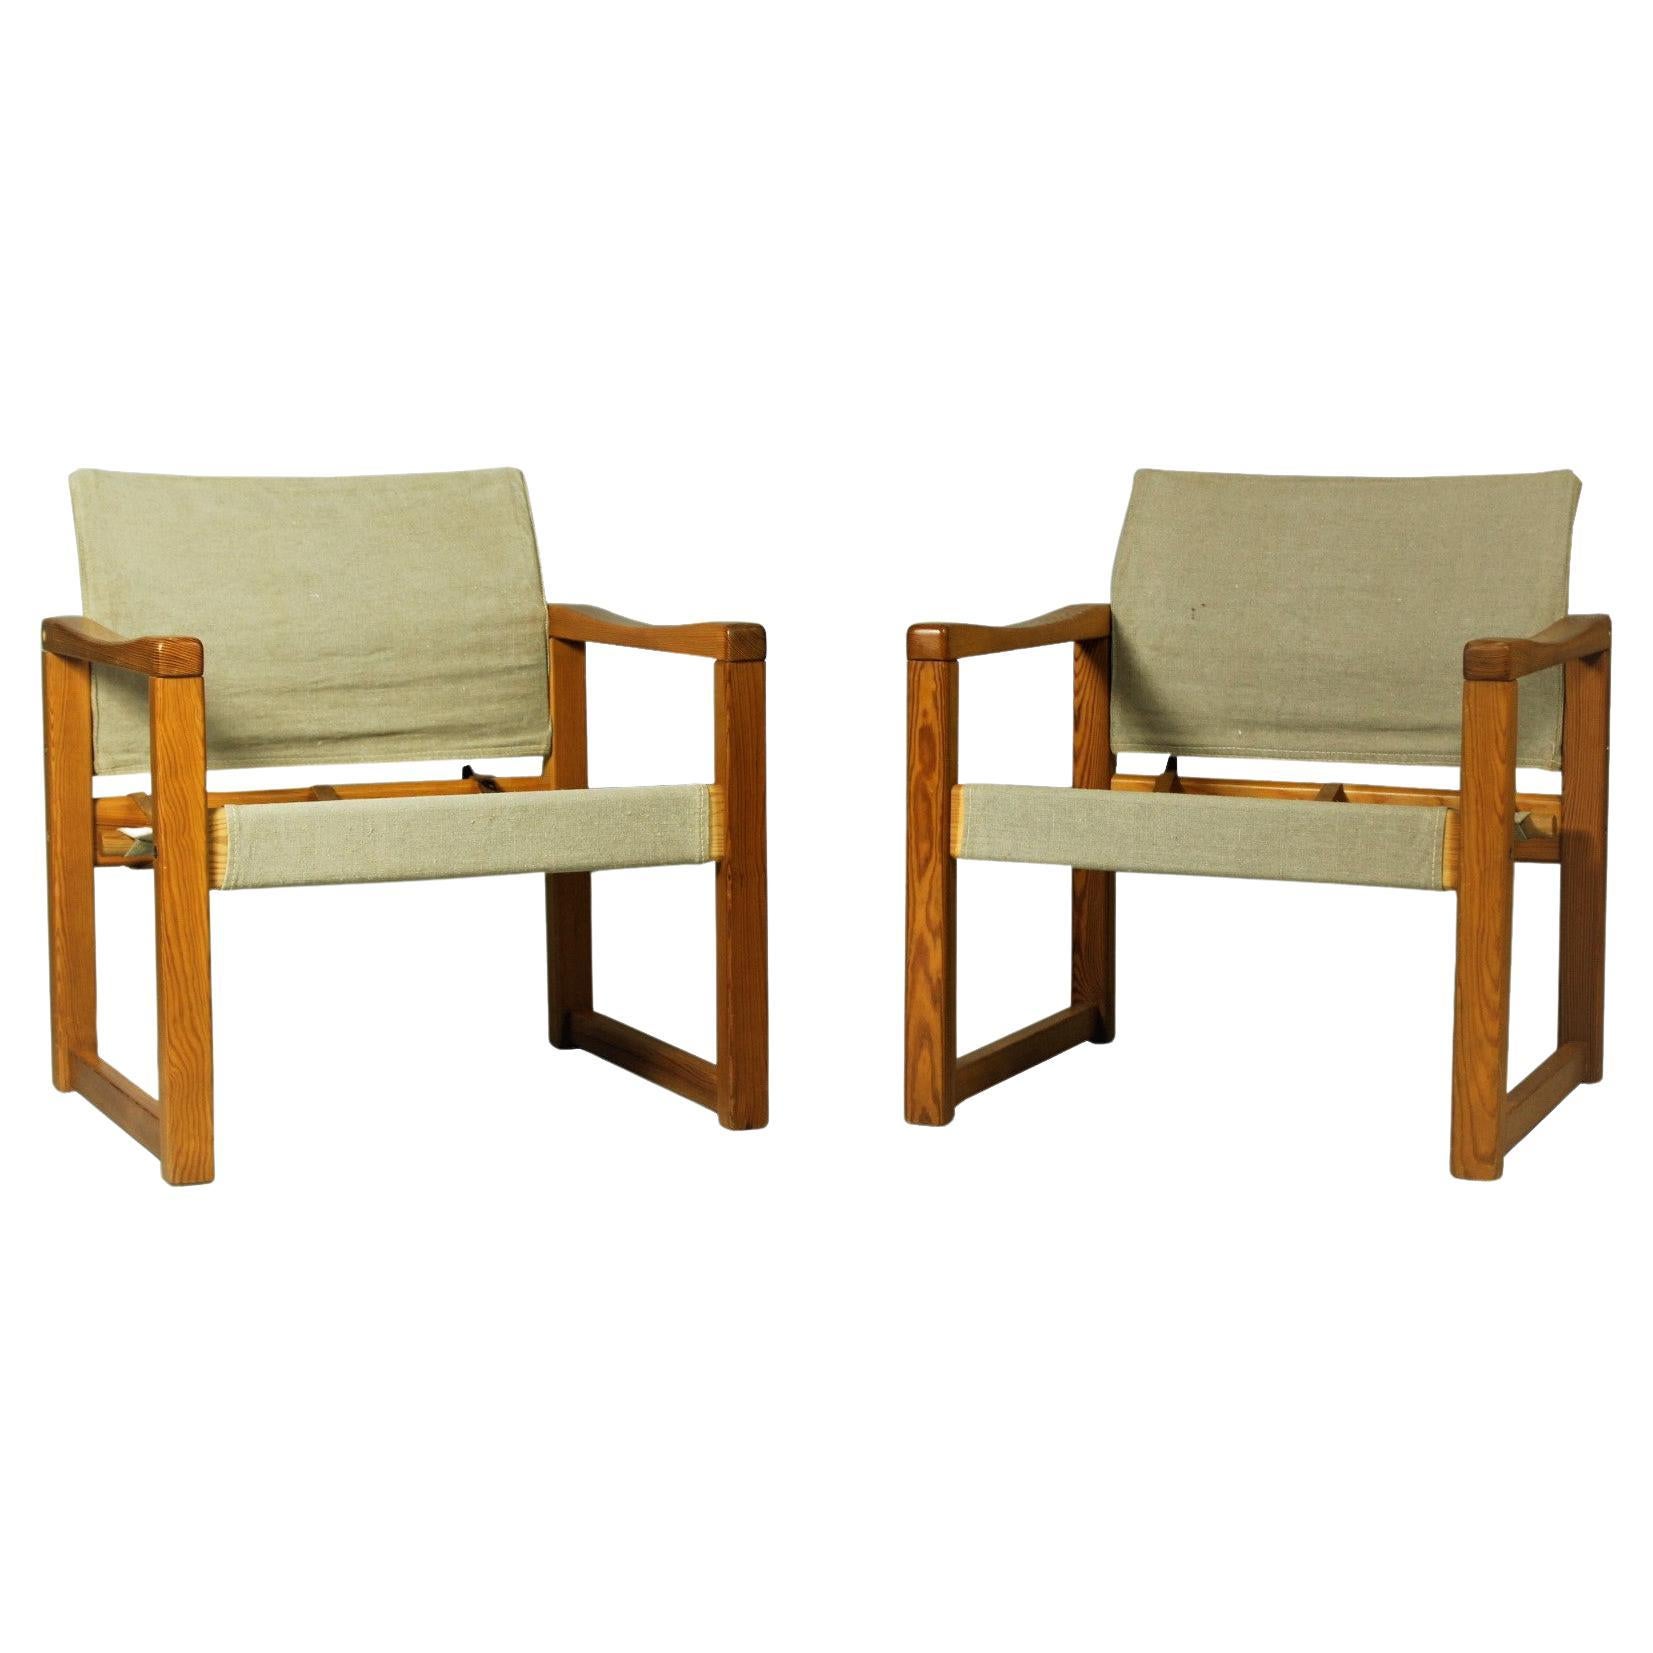 Model Diana Lounge Chairs by Karin Mobring for Ikea, 1970s For Sale